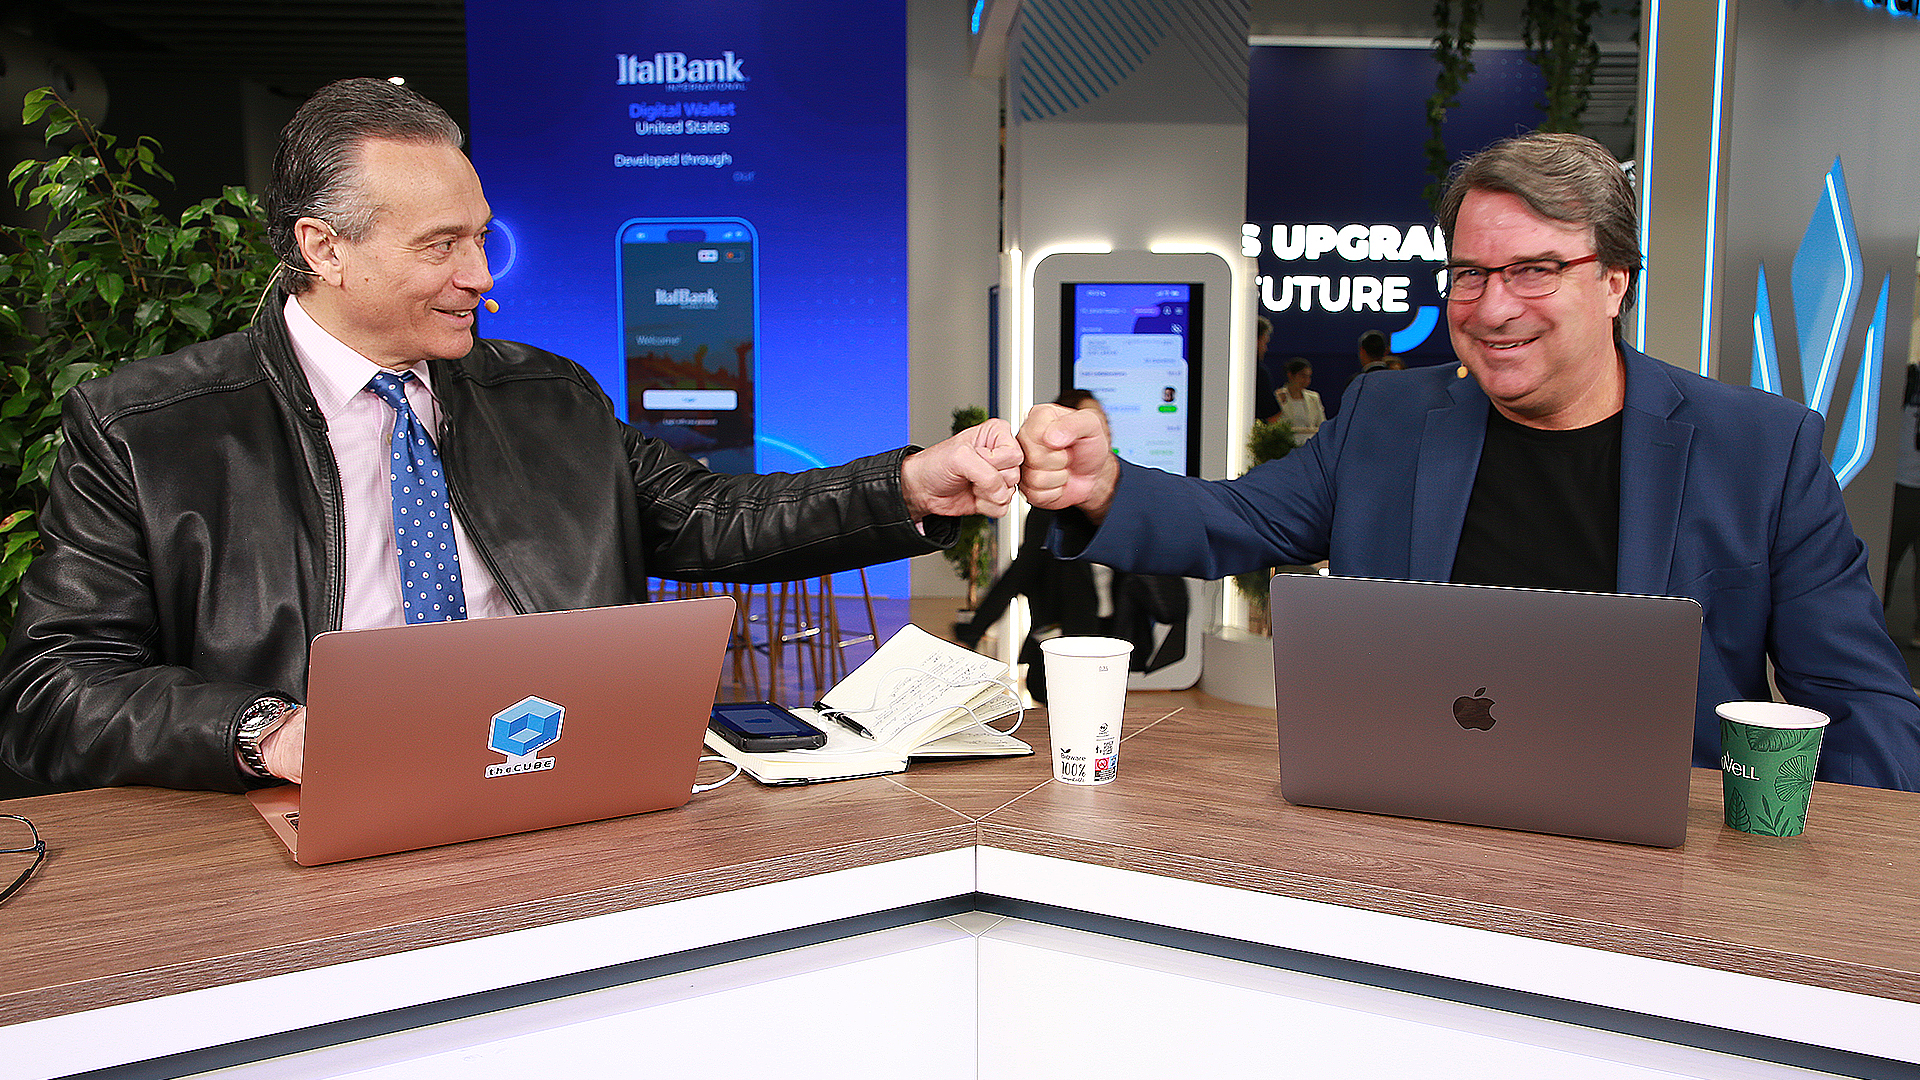 Dave Vellante and John Furrier, theCUBE Research industry analysts, recap the history of silicon as a part of the latest episode of theCUBE podcast.